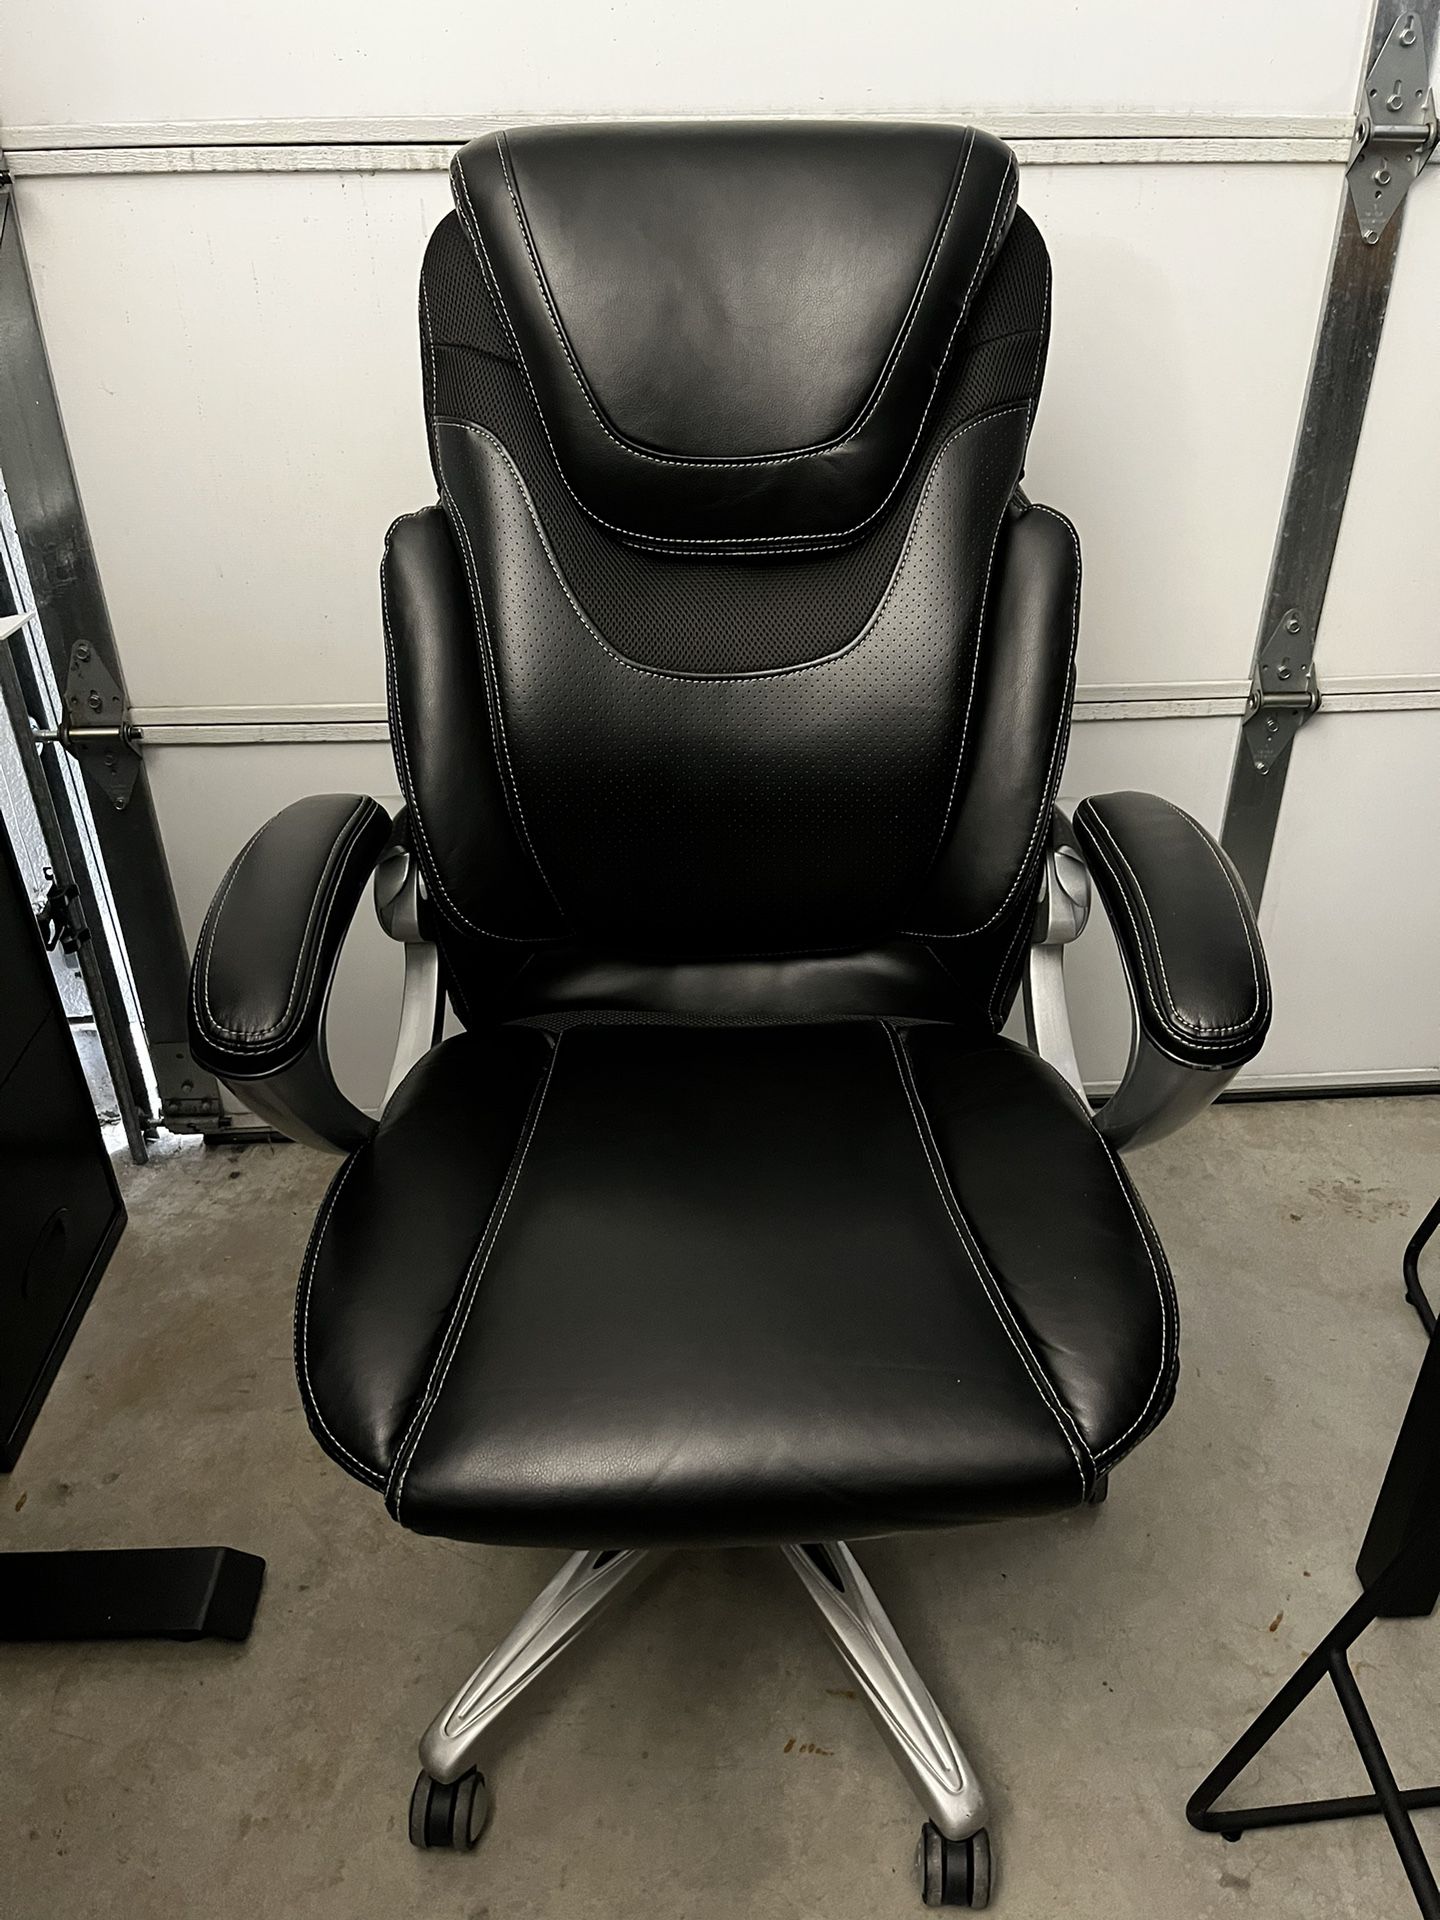 Serta Works Executive Office Chair with AIR Technology